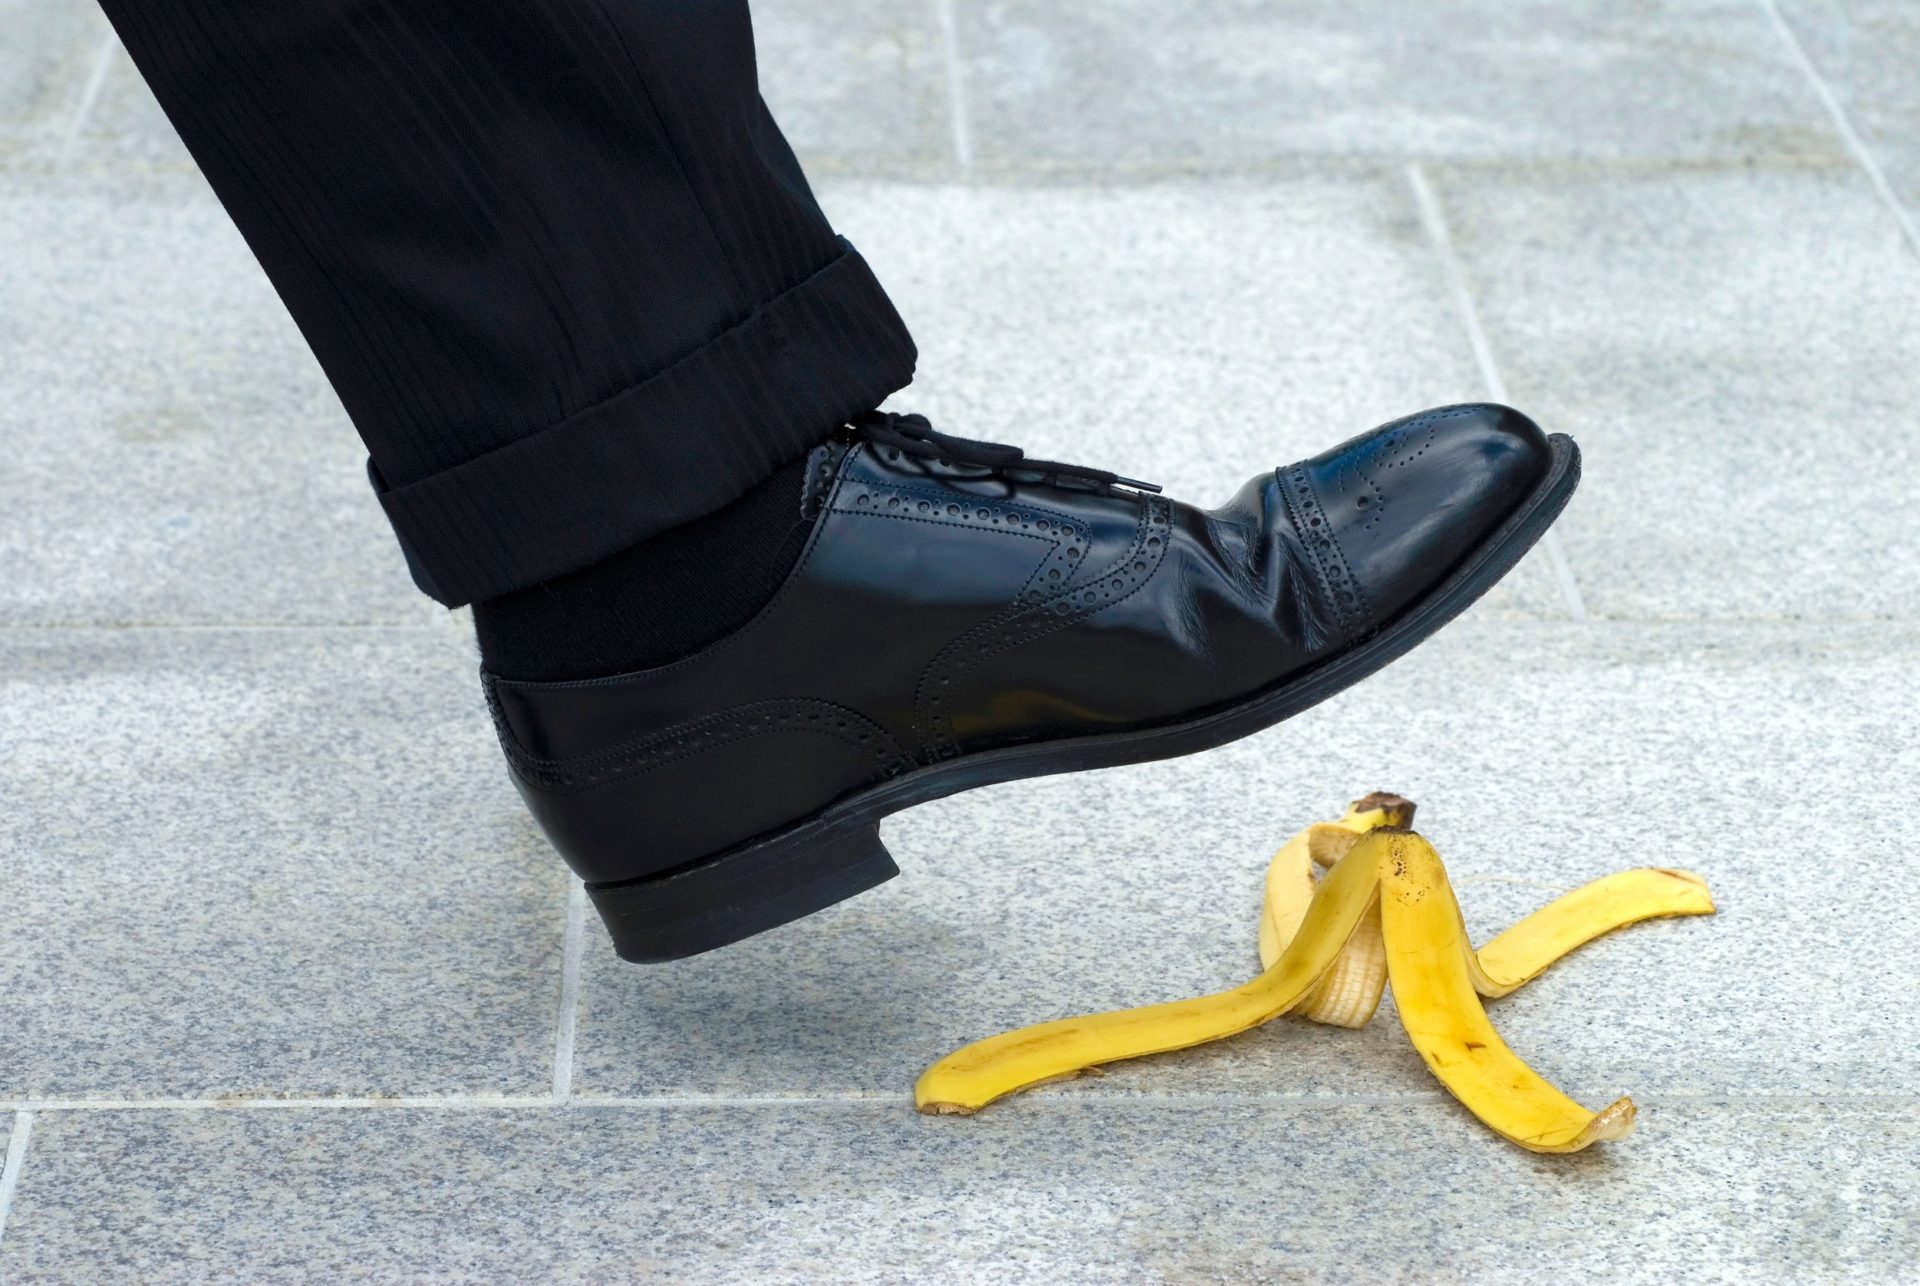 How to Strengthen Your NY Slip and Fall Case